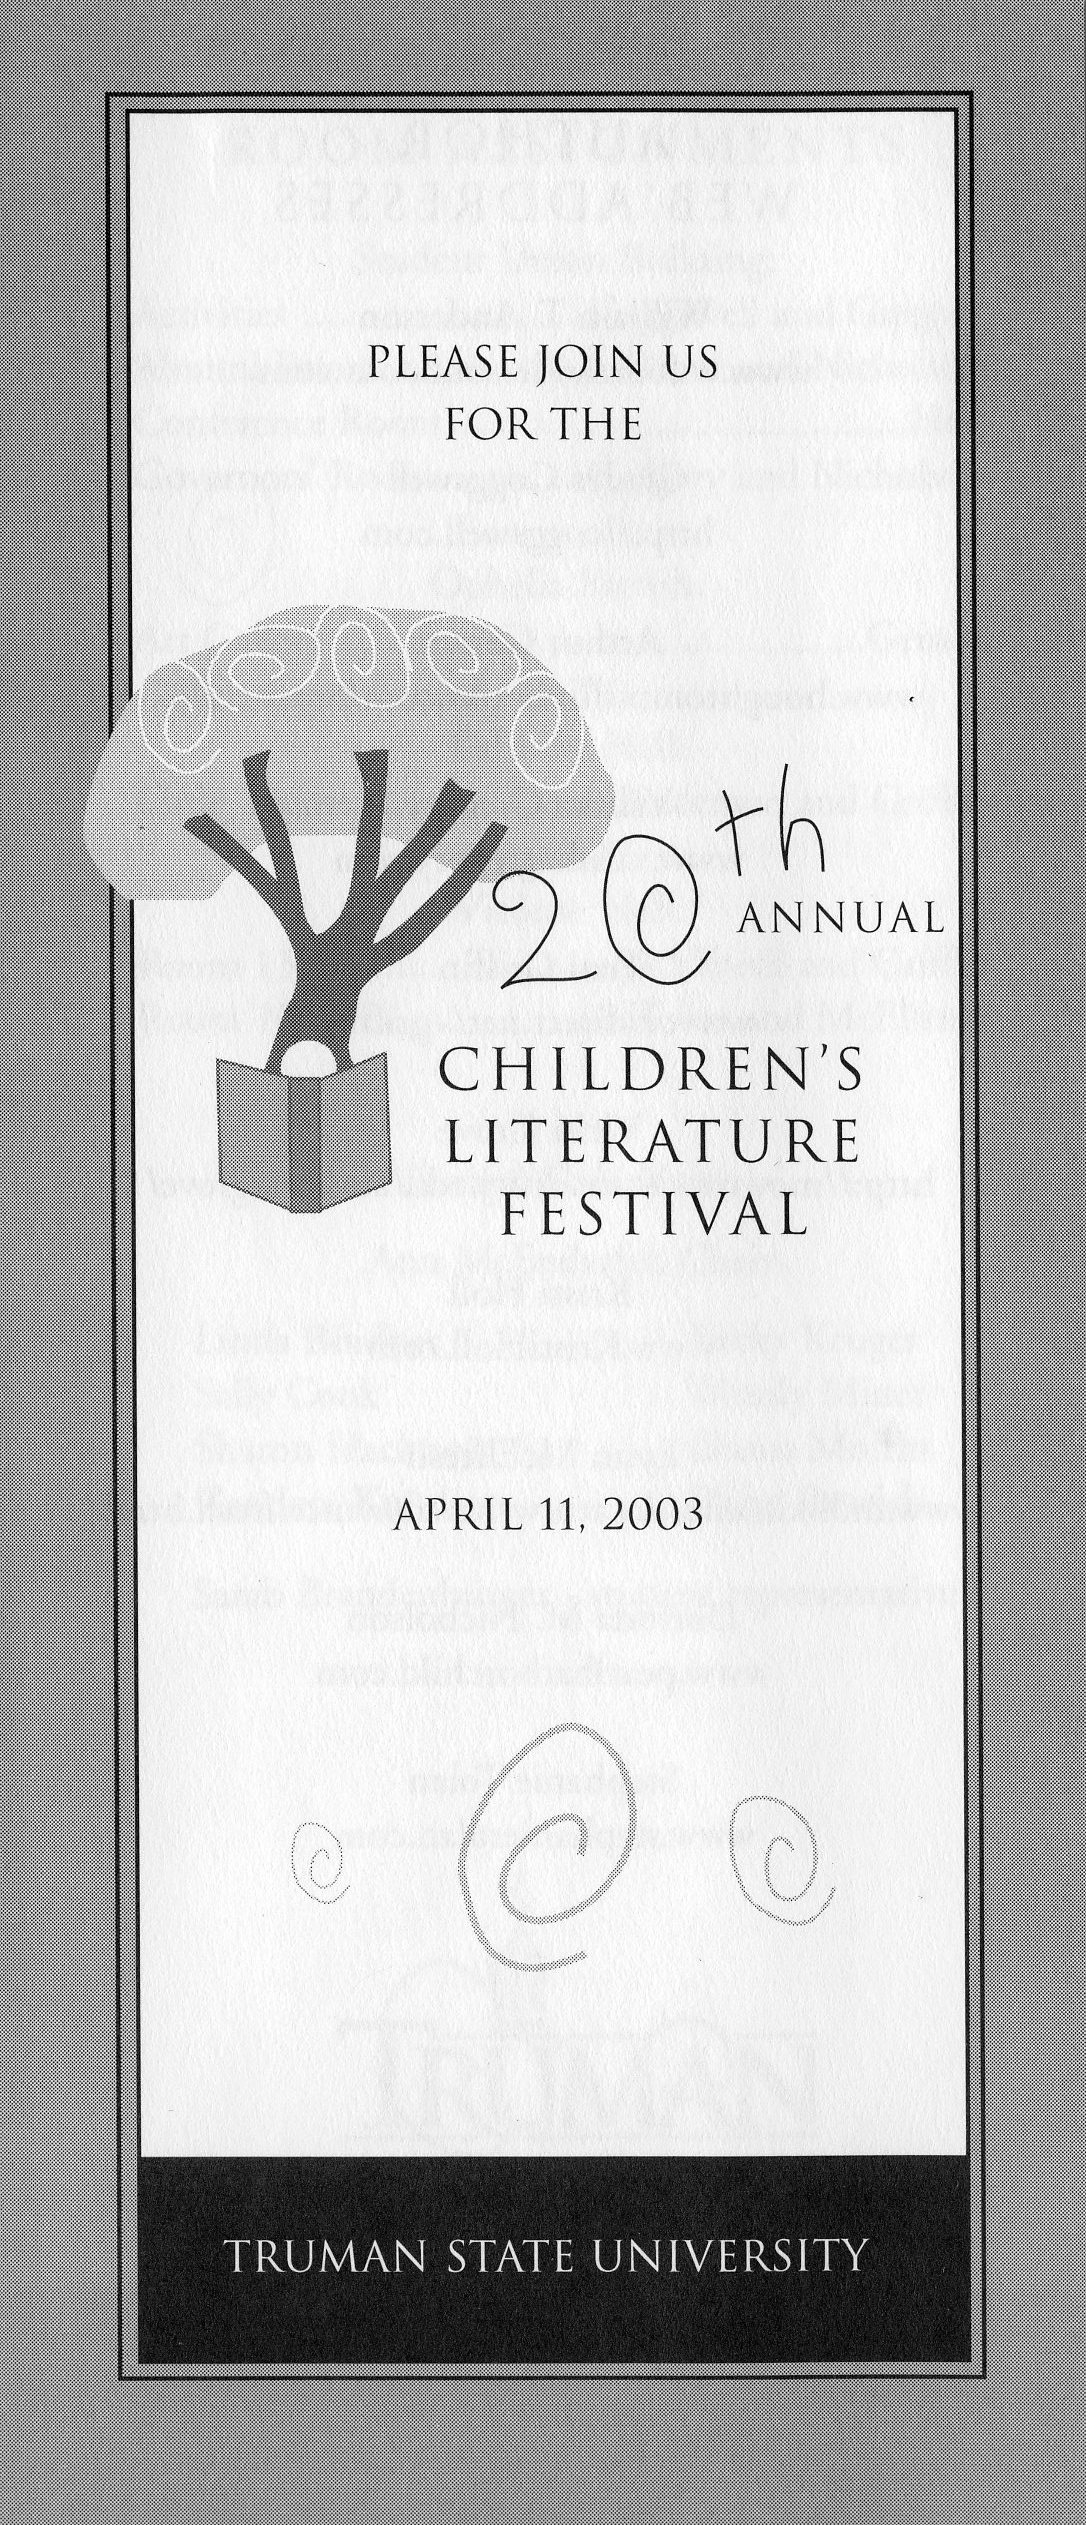 2003 brochure with book and tree